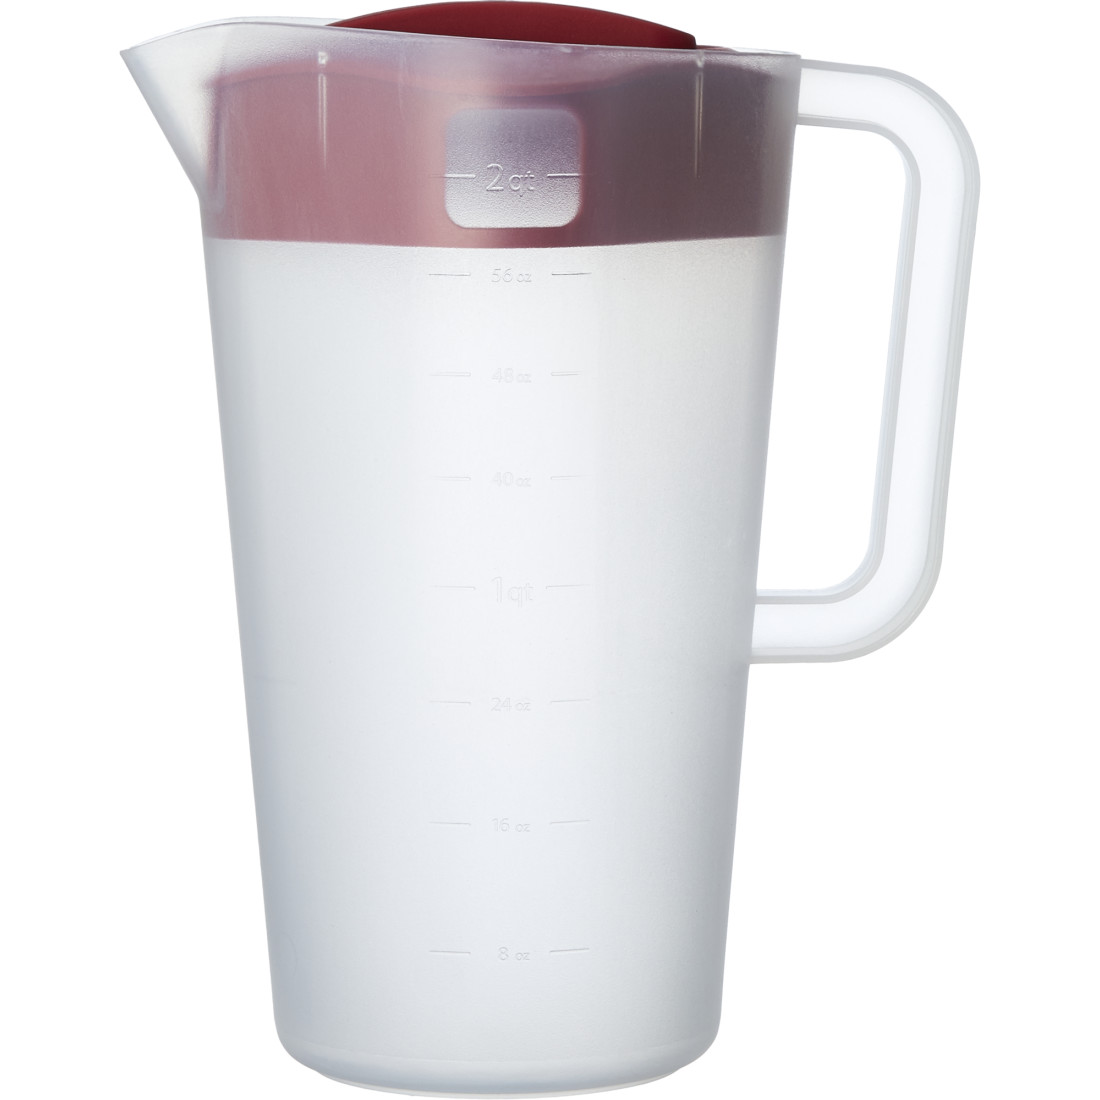 Arrow 1 Gallon Plastic Pitcher with Lid - Clear Plastic Pitcher for  Refrigerator, Fill with Cold Drinks - BPA Free, Space-Saving Rectangular  Design 